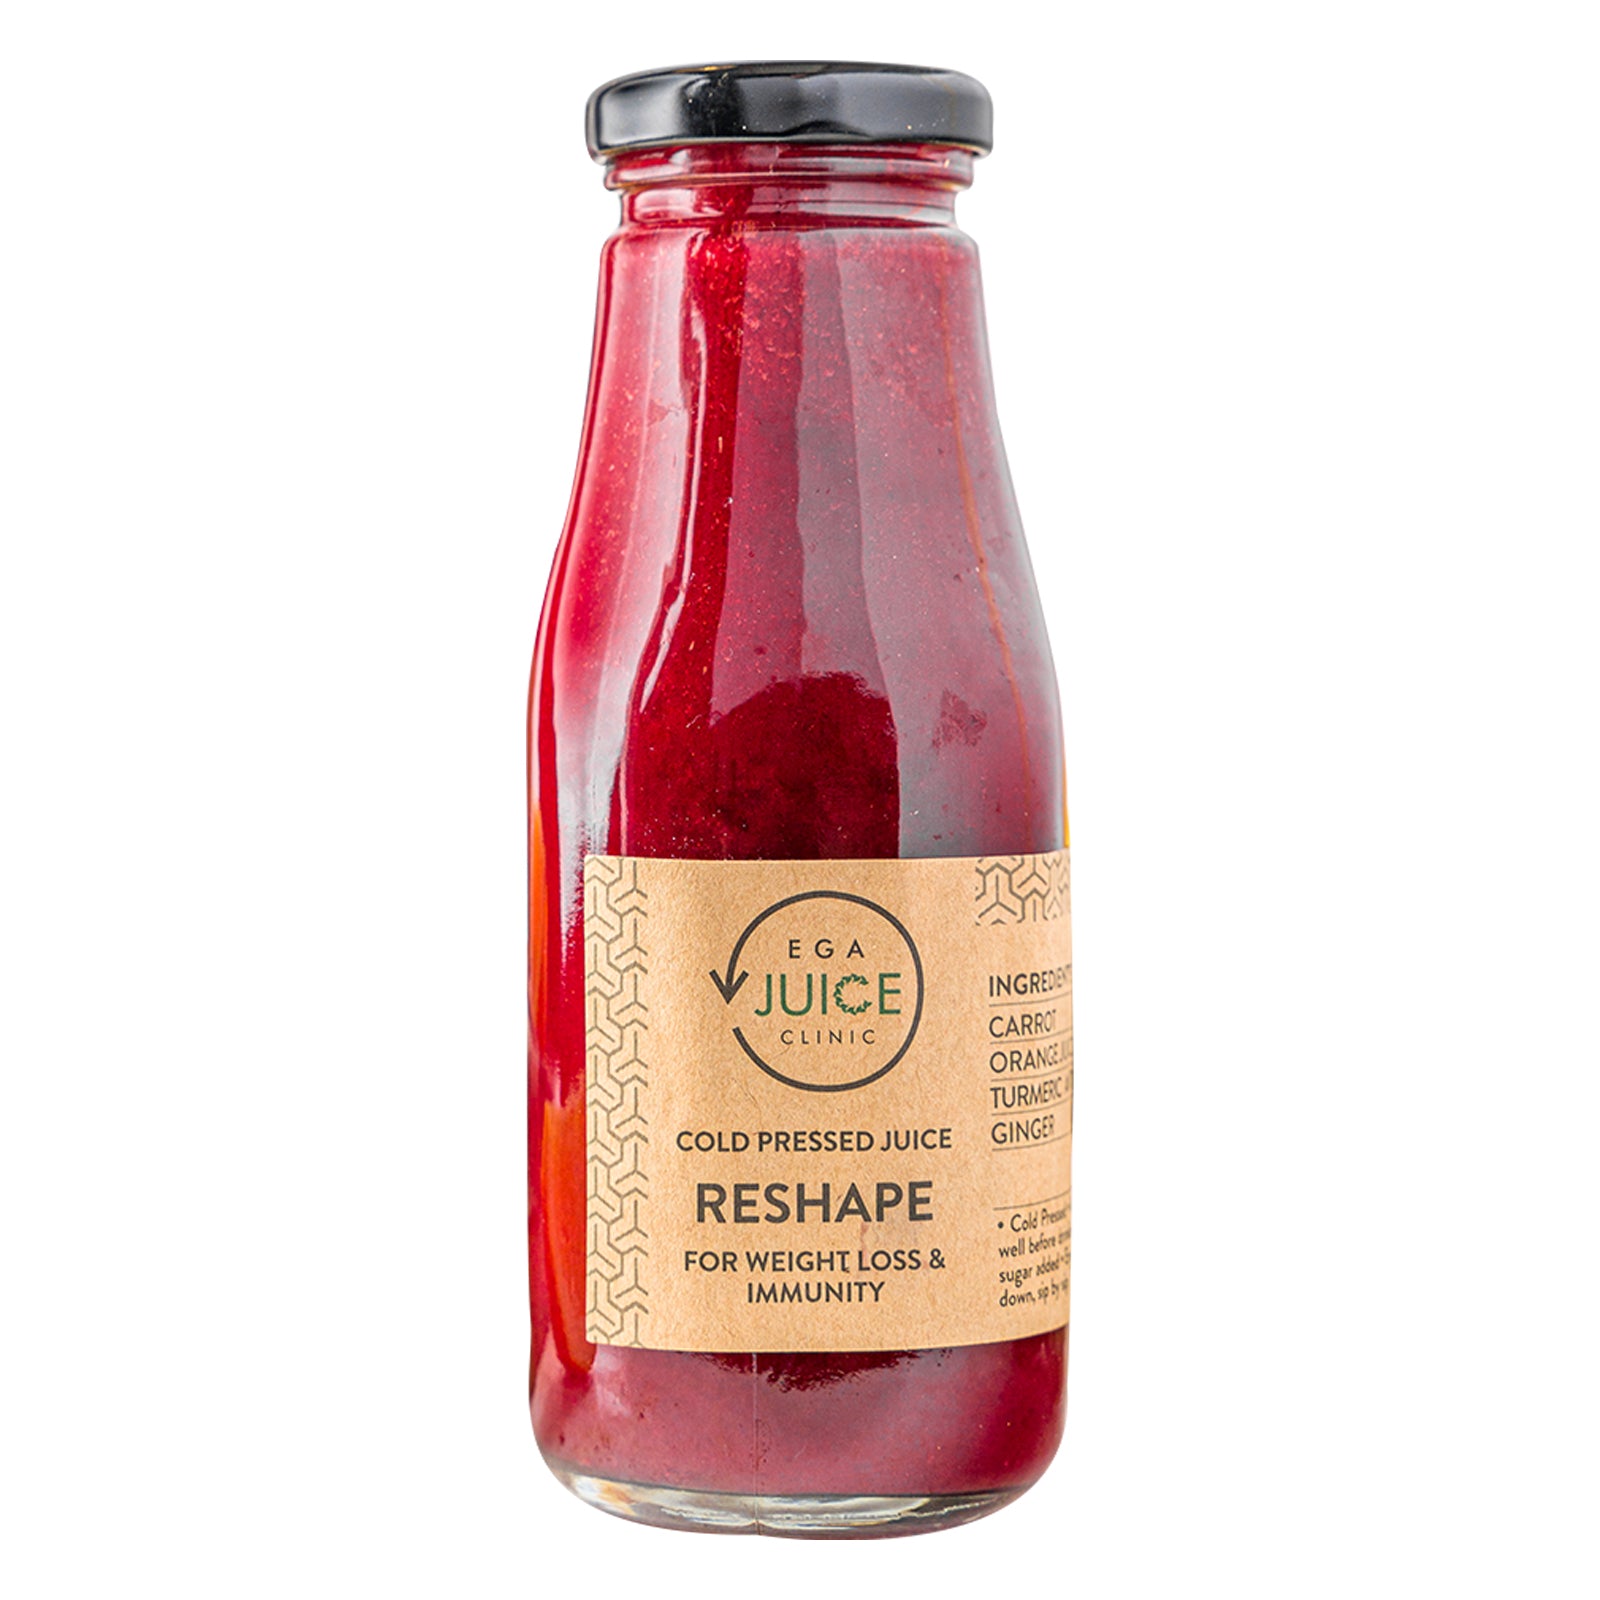 Reshape Juice For Weight loss & Immunity